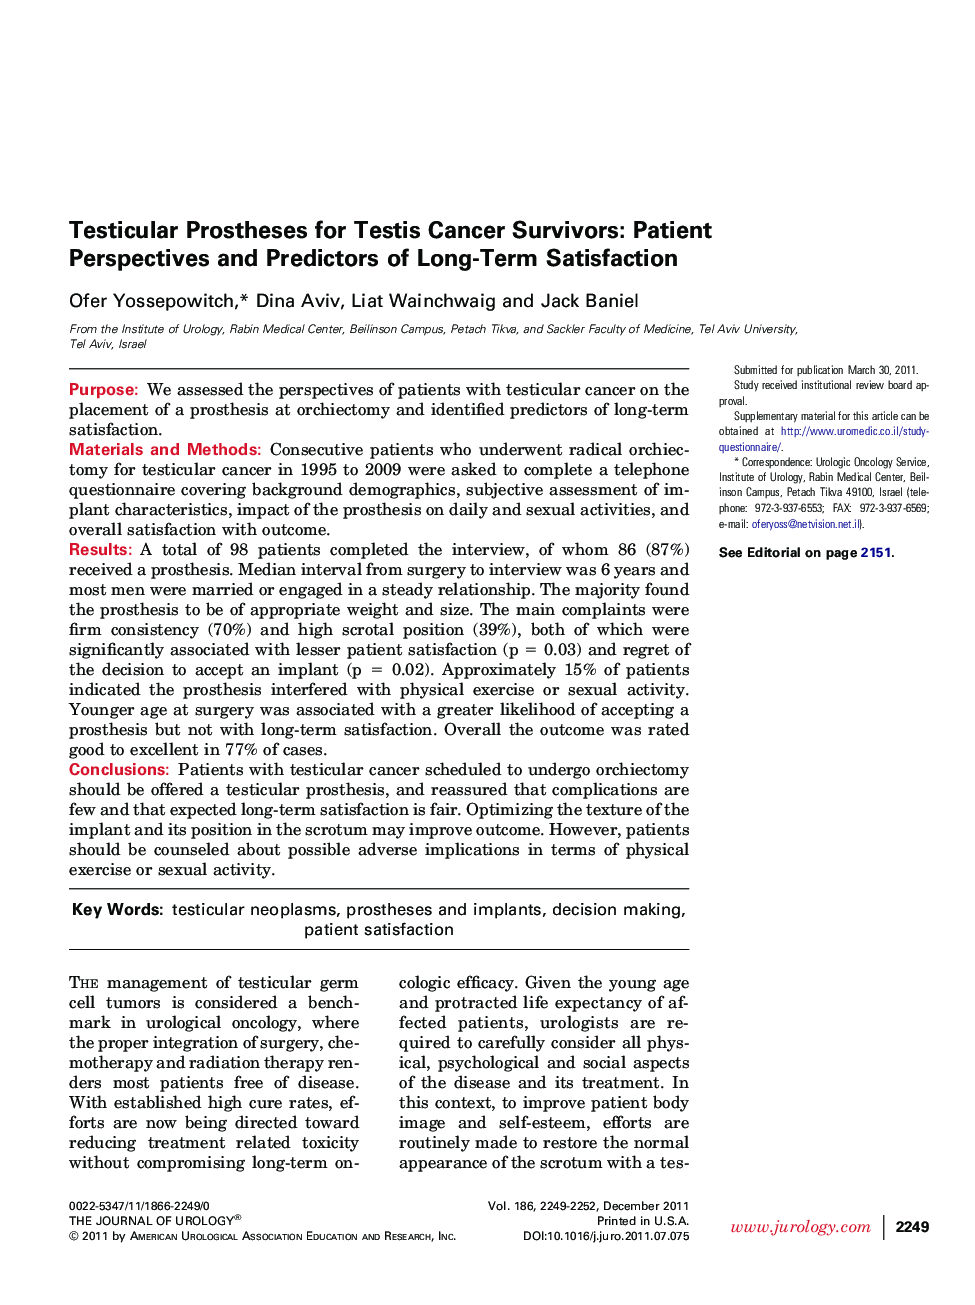 Testicular Prostheses for Testis Cancer Survivors: Patient Perspectives and Predictors of Long-Term Satisfaction 